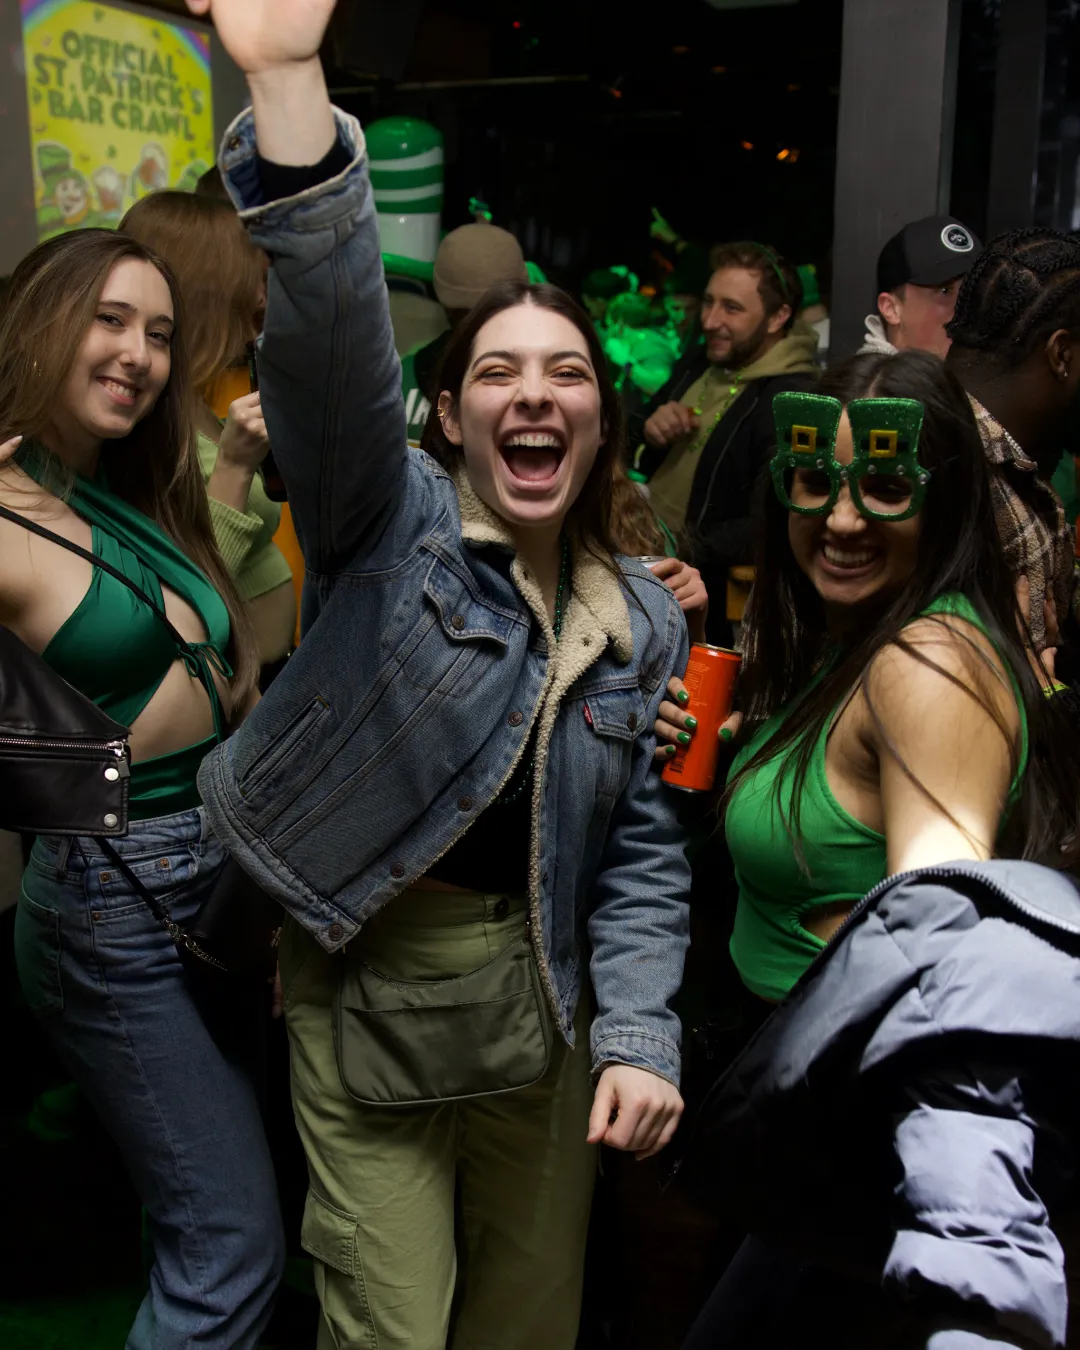 Group of girlfriends decked out in their most glamorous green showcasing their festive spirit making every moment count at the St. Patrick's Day bar hop in Cleveland
